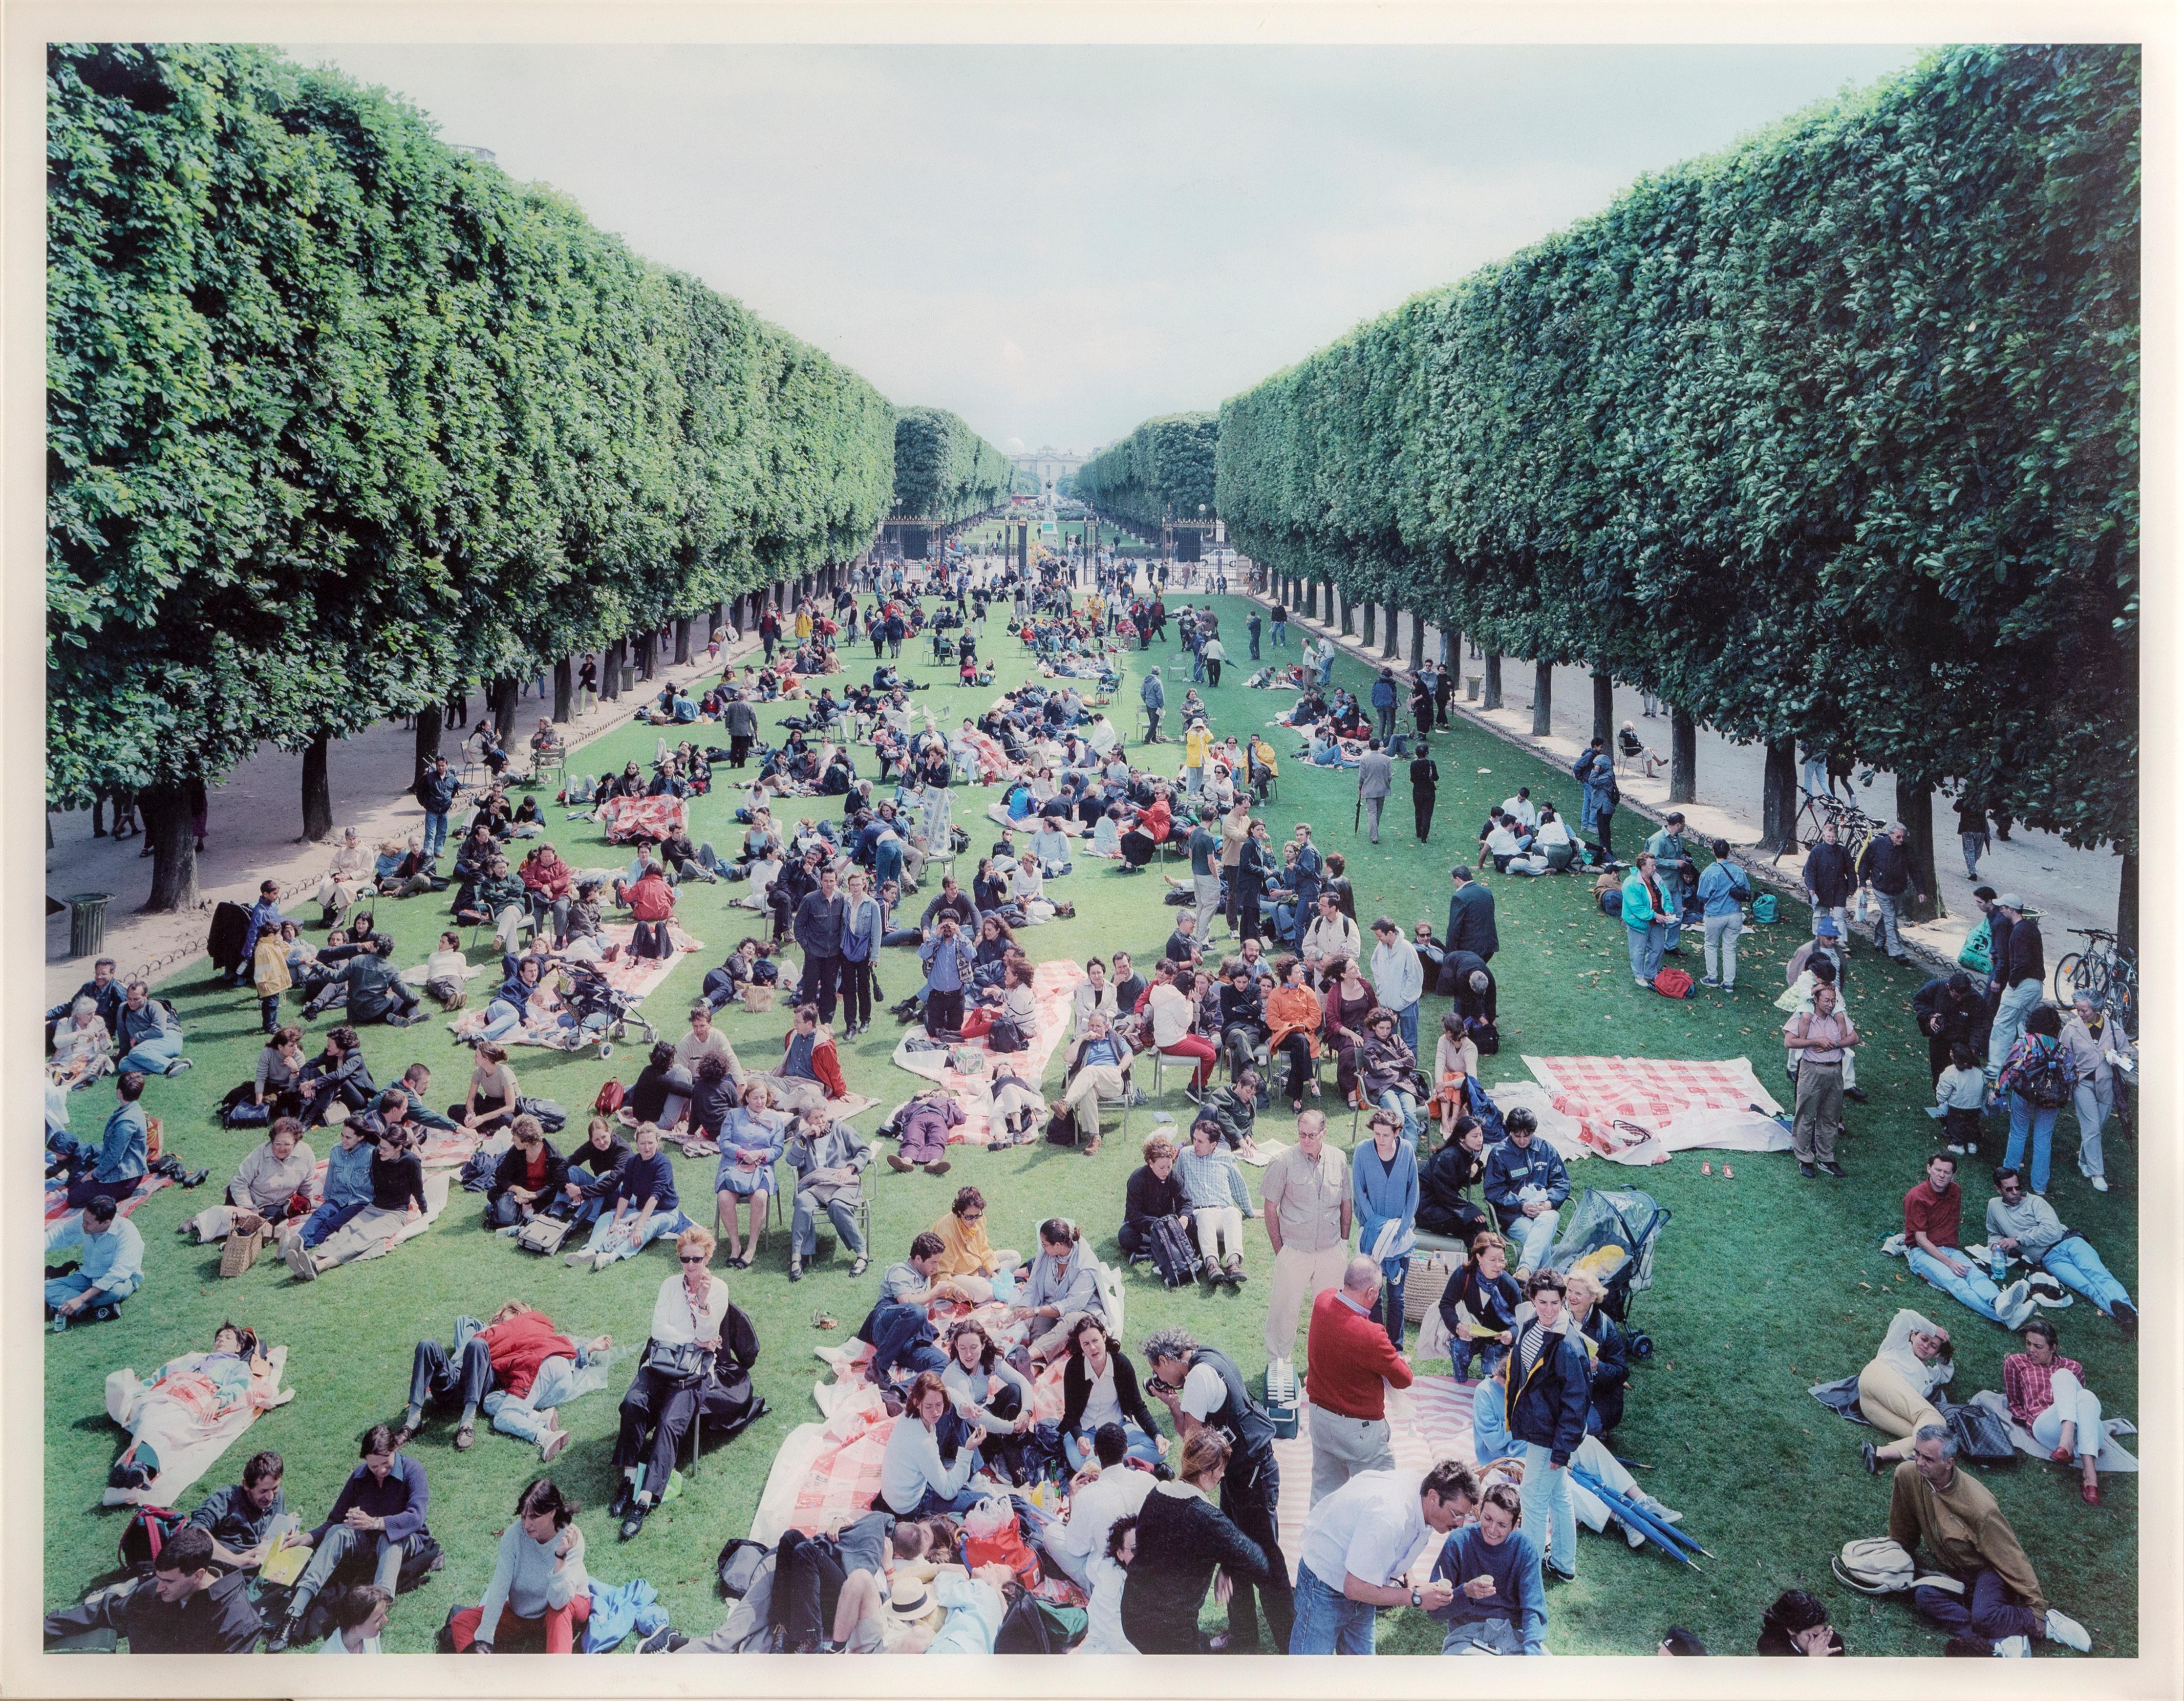 Massimo Vitali Landscape Photograph - Picnic Allee (Image #26) from Landscapes with Figures